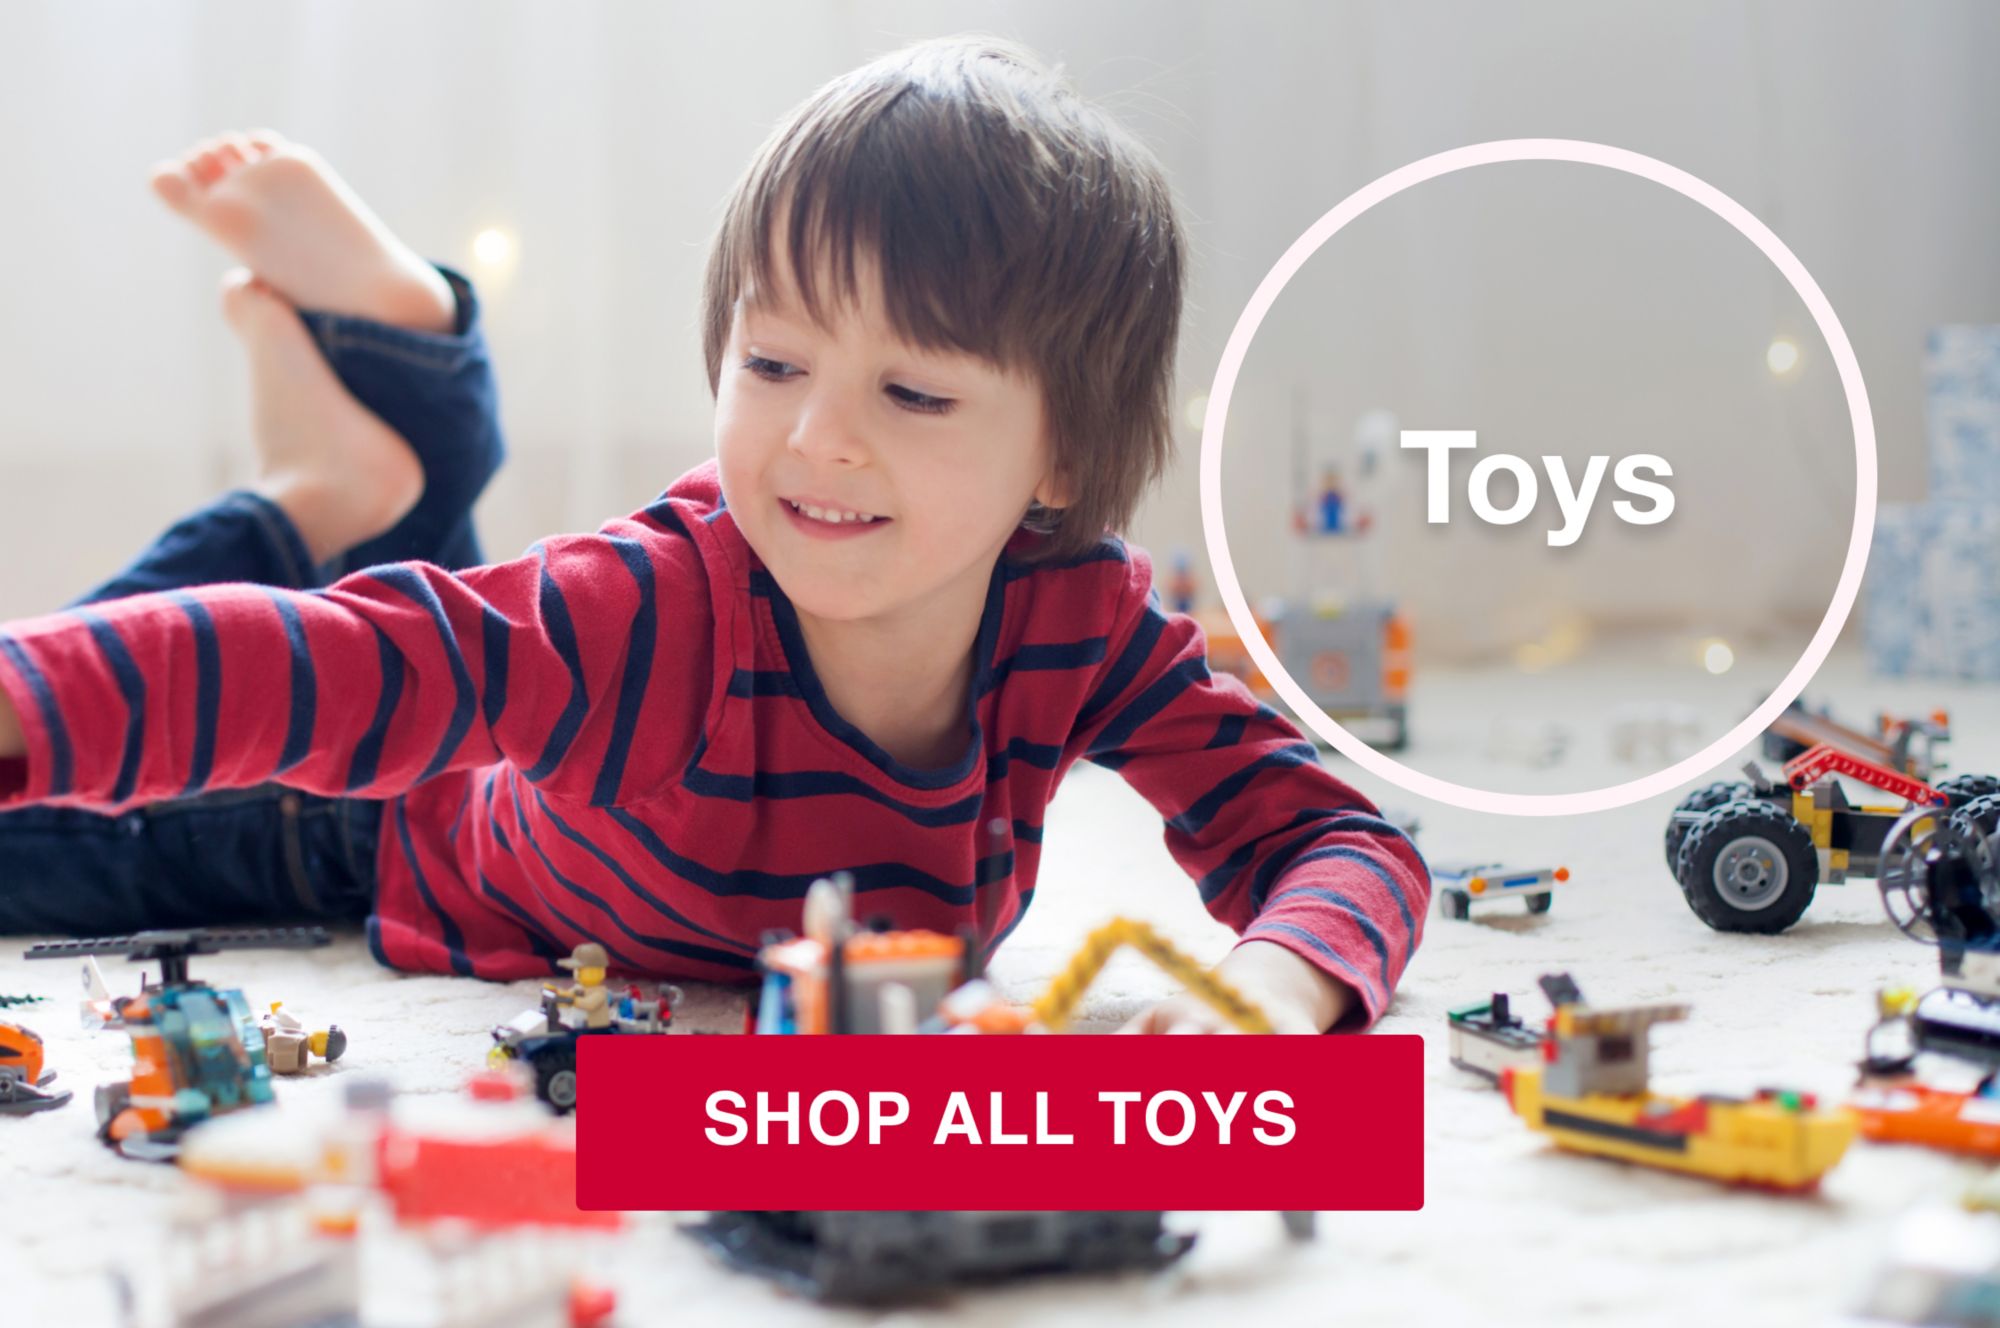 Toys category. A kid playing with legos on the floor